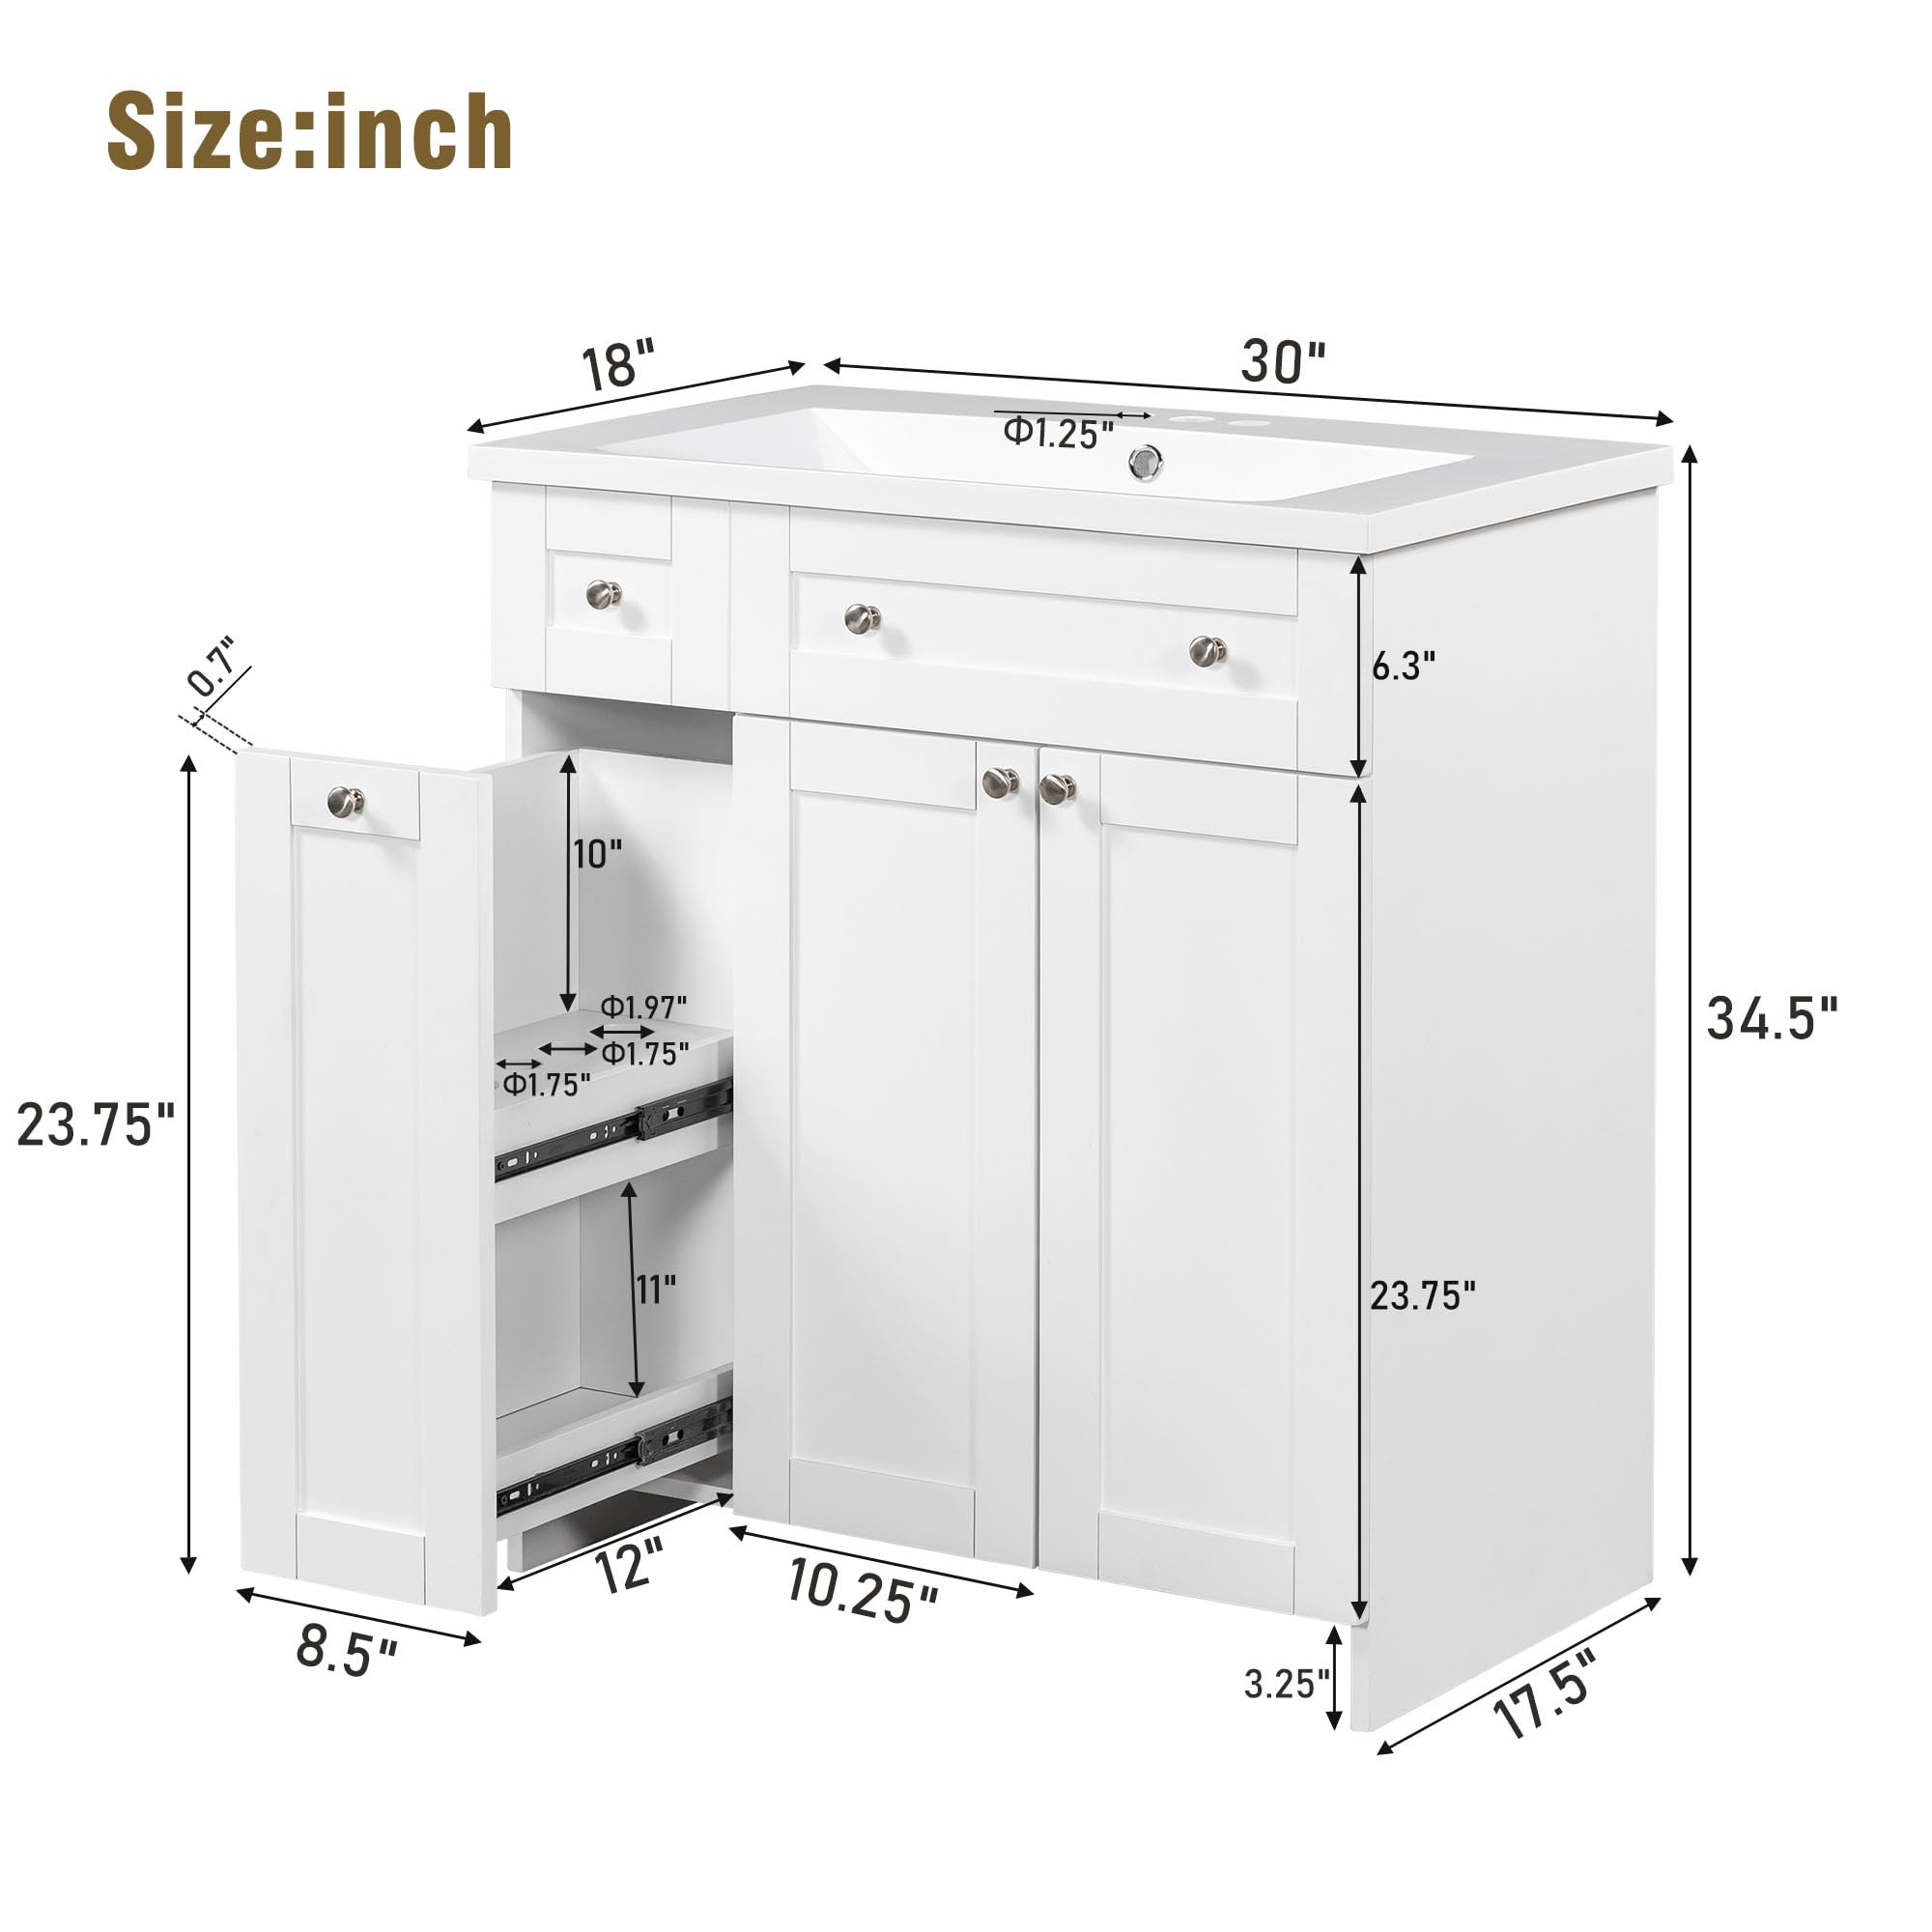 Lostcat 30inch Bathroom Vanity with Single Sink,Freestanding Bathroom Vanity,Combo Cabinet Undermount Sink,with 2 Doors and High Drawer for Bathroom No Mirror,Easy Assembly(White)